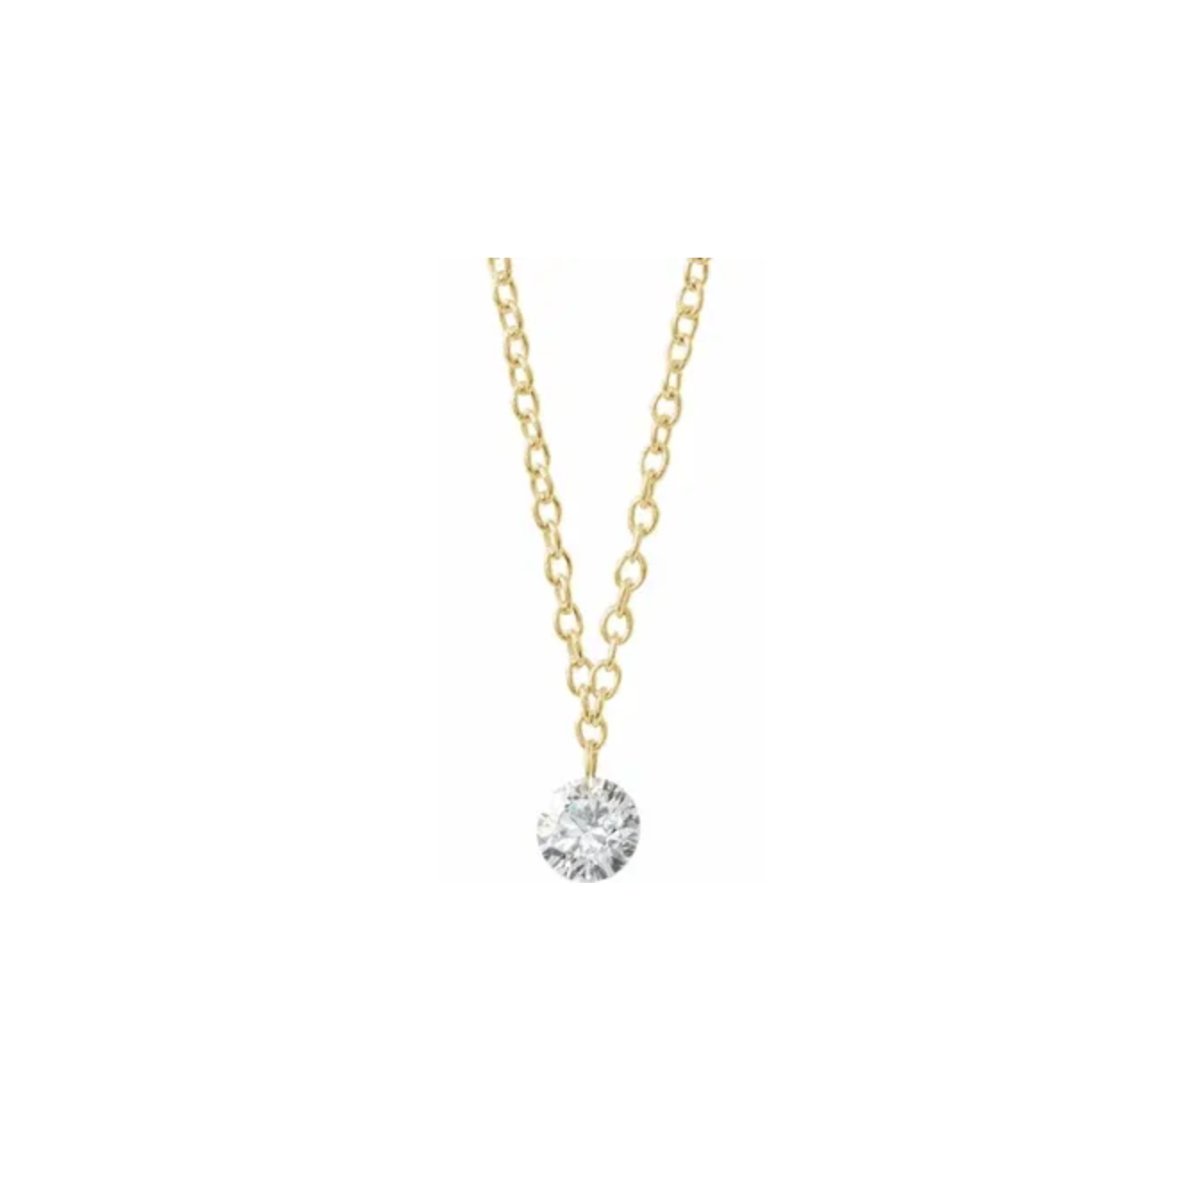 Drilled Diamond Necklace - Camille Jewelry